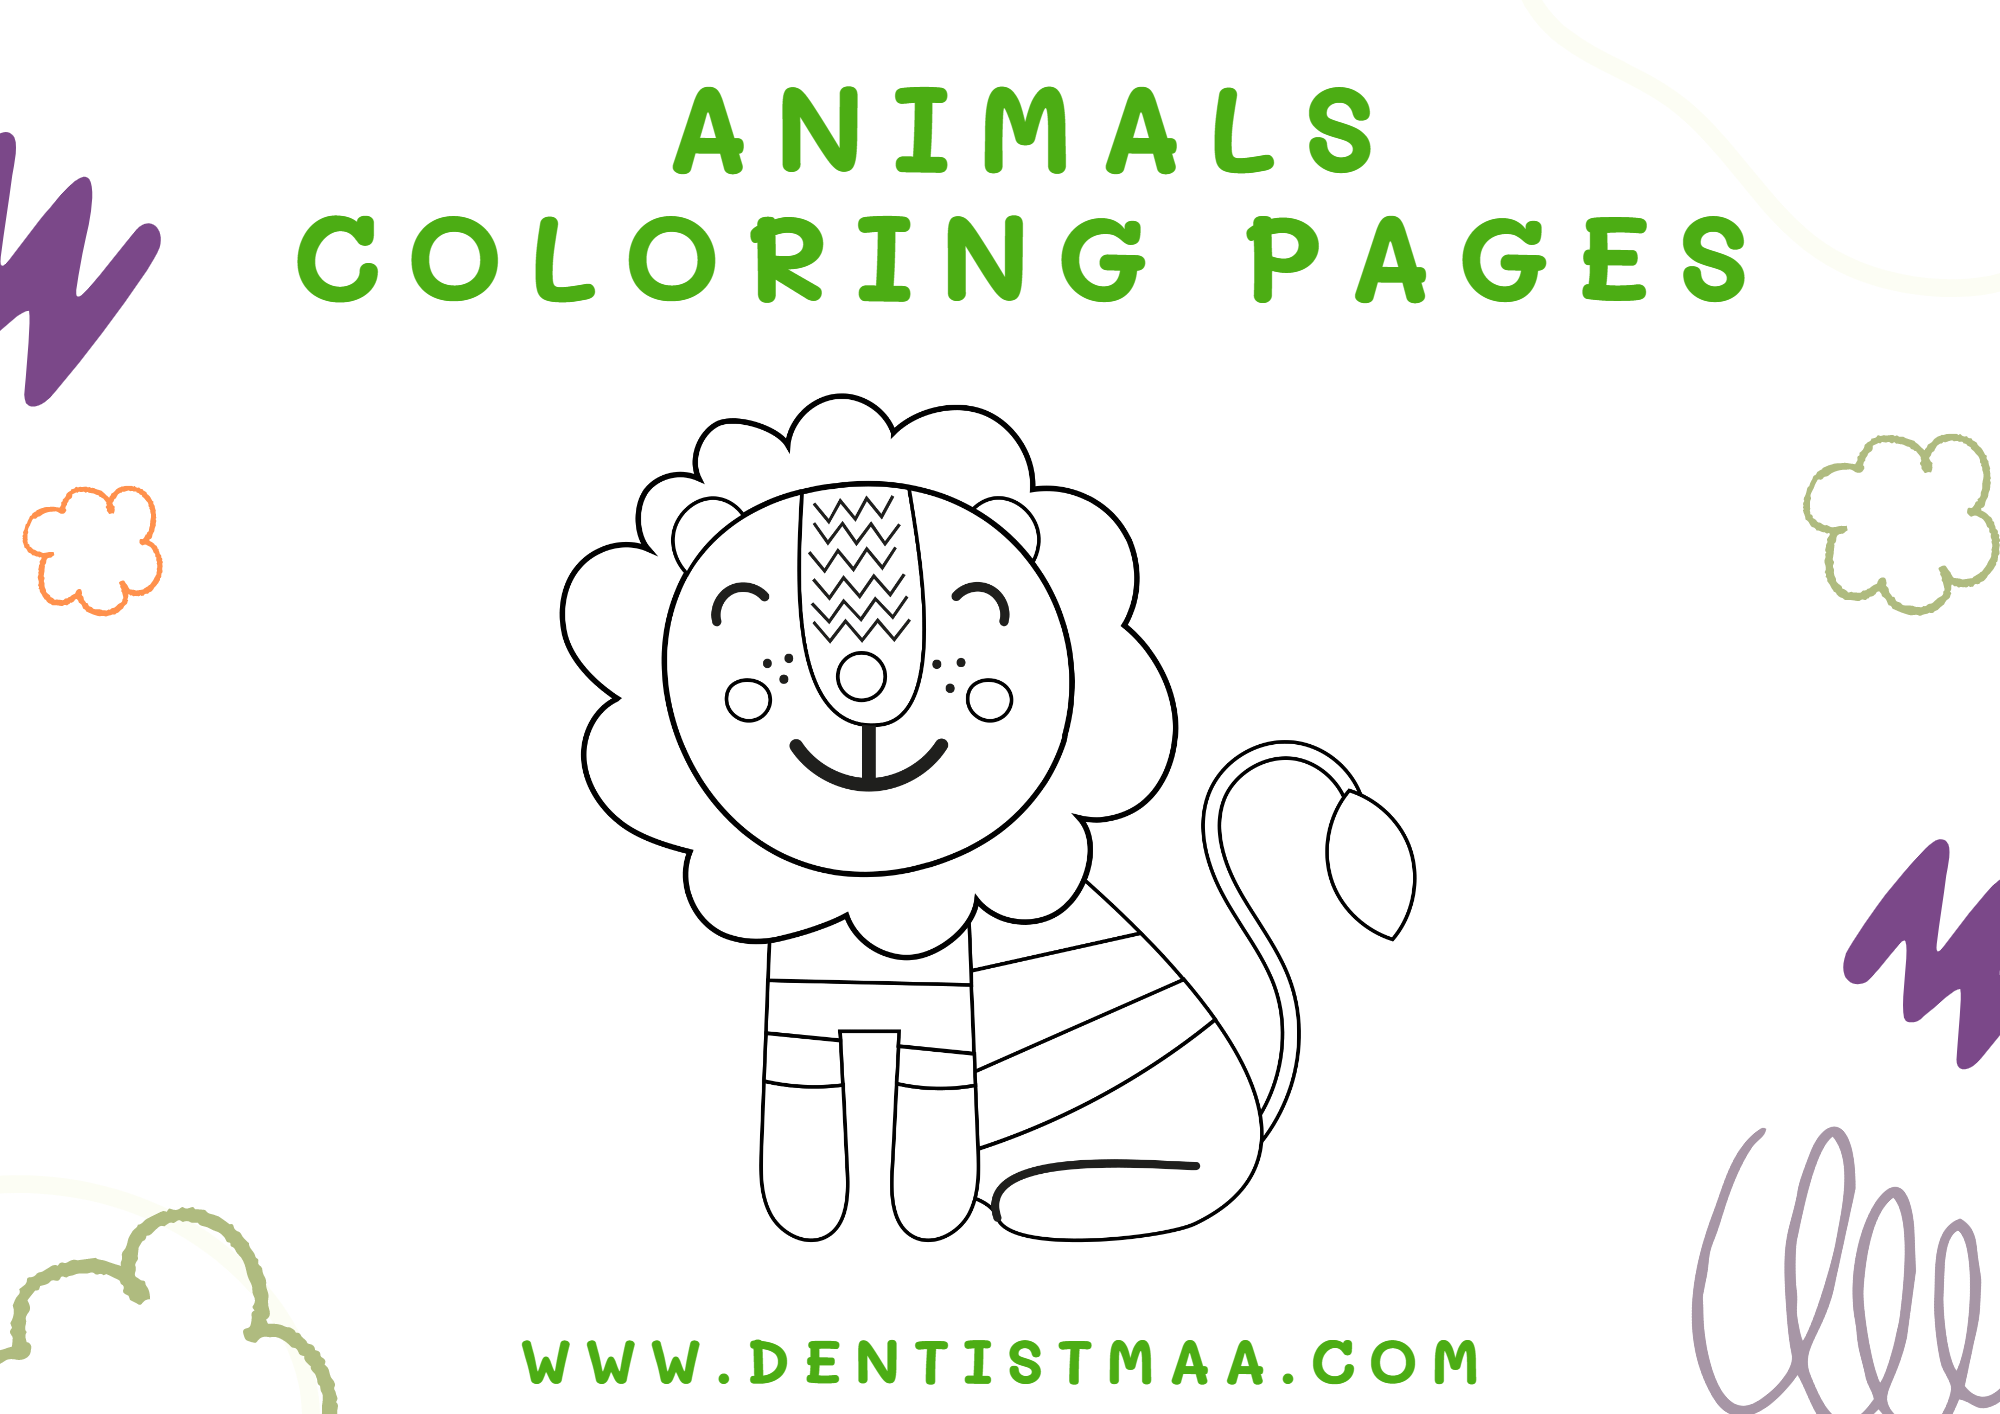 ANIMALS COLORING PAGES FOR KIDS, FREE COLORING PAGE DOWNLOAD